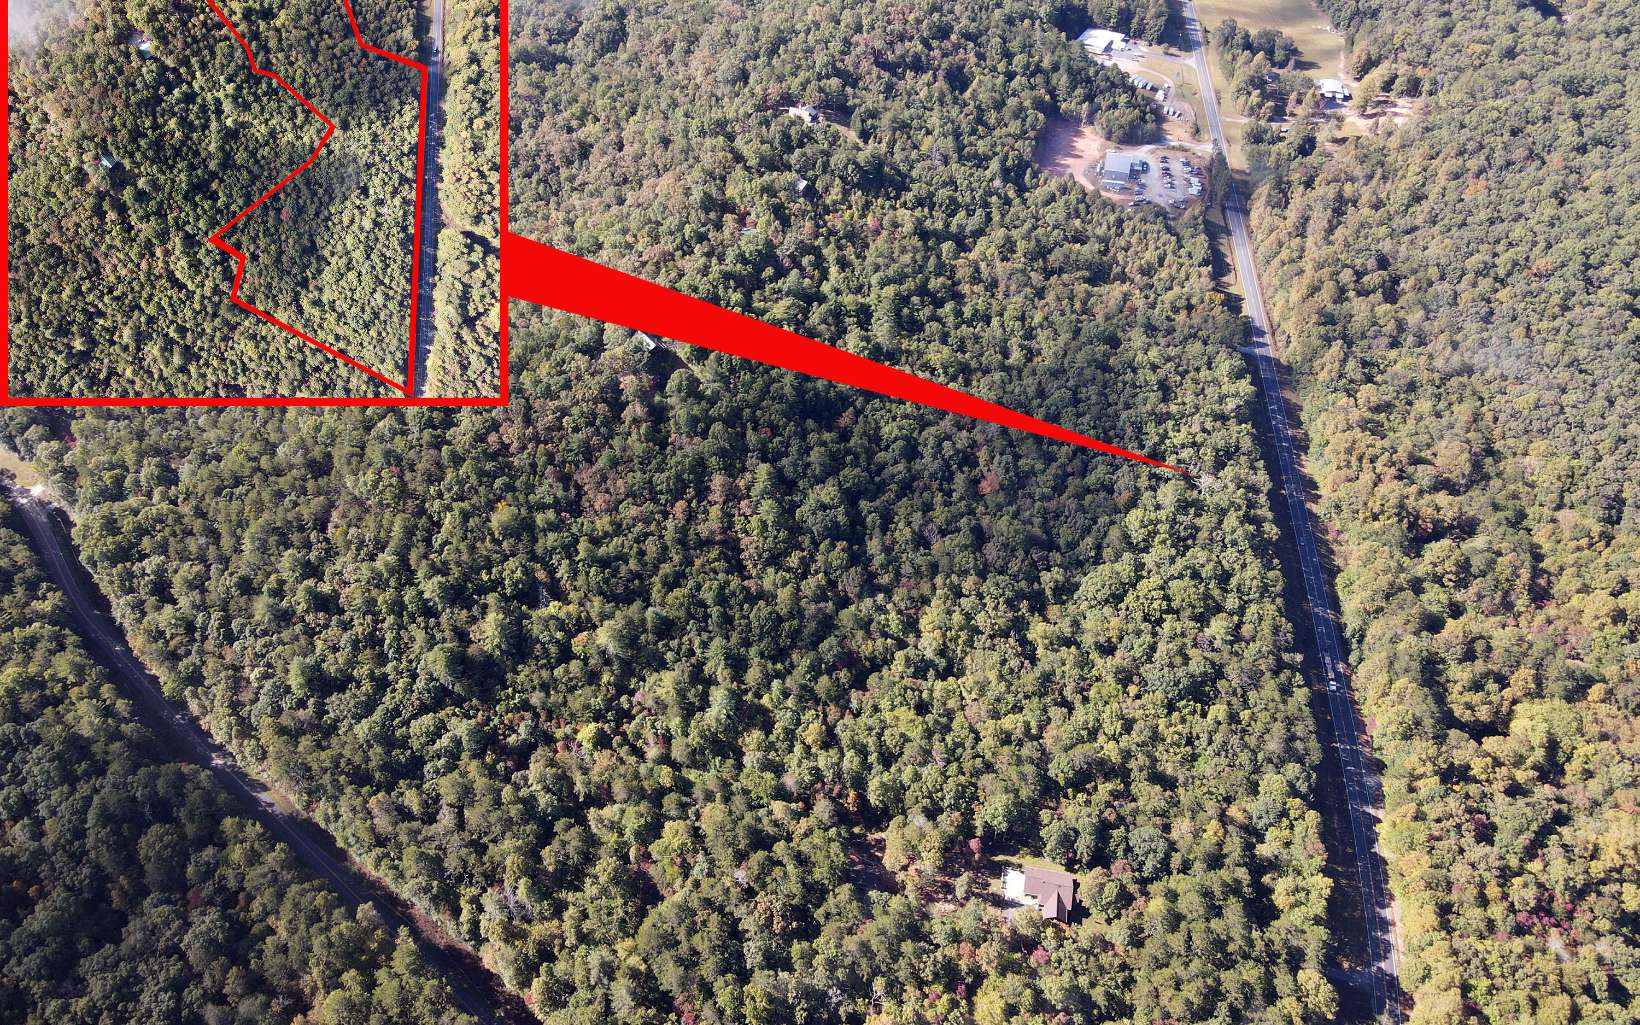 UNRESTRICTED 7.25 ACRES! Do as you please with this large tract of land. For those who desire an even larger tract there are 5.5 acres that attach available as well!!! This property is conveniently located less than 15 minutes to downtown Blue Ridge and less than 30 minutes to McCaysville/Copperhill/Murphy. Close but yet not too close for all your shopping and entertaining needs! The possibilities on this gentle laying land are endless. Make your dreams come true with this tract and check it out!